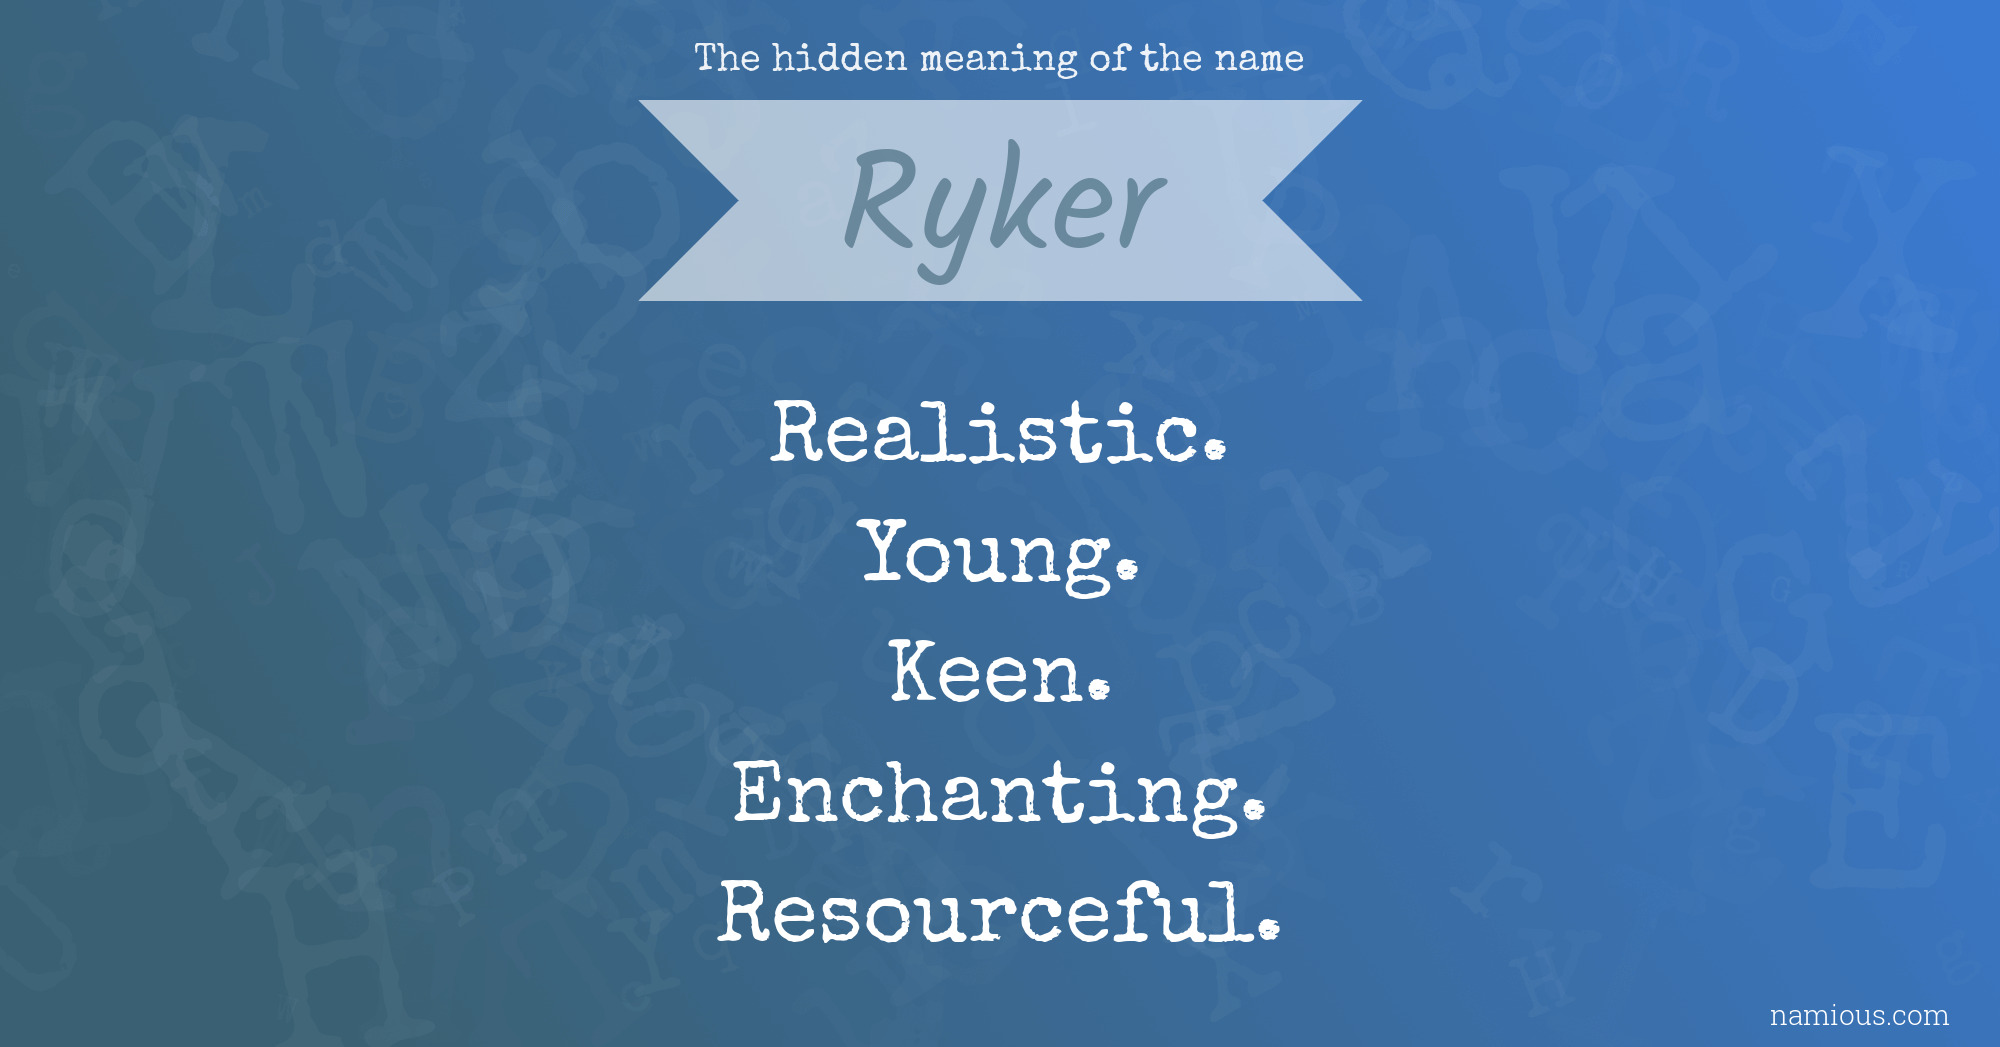 The hidden meaning of the name Ryker